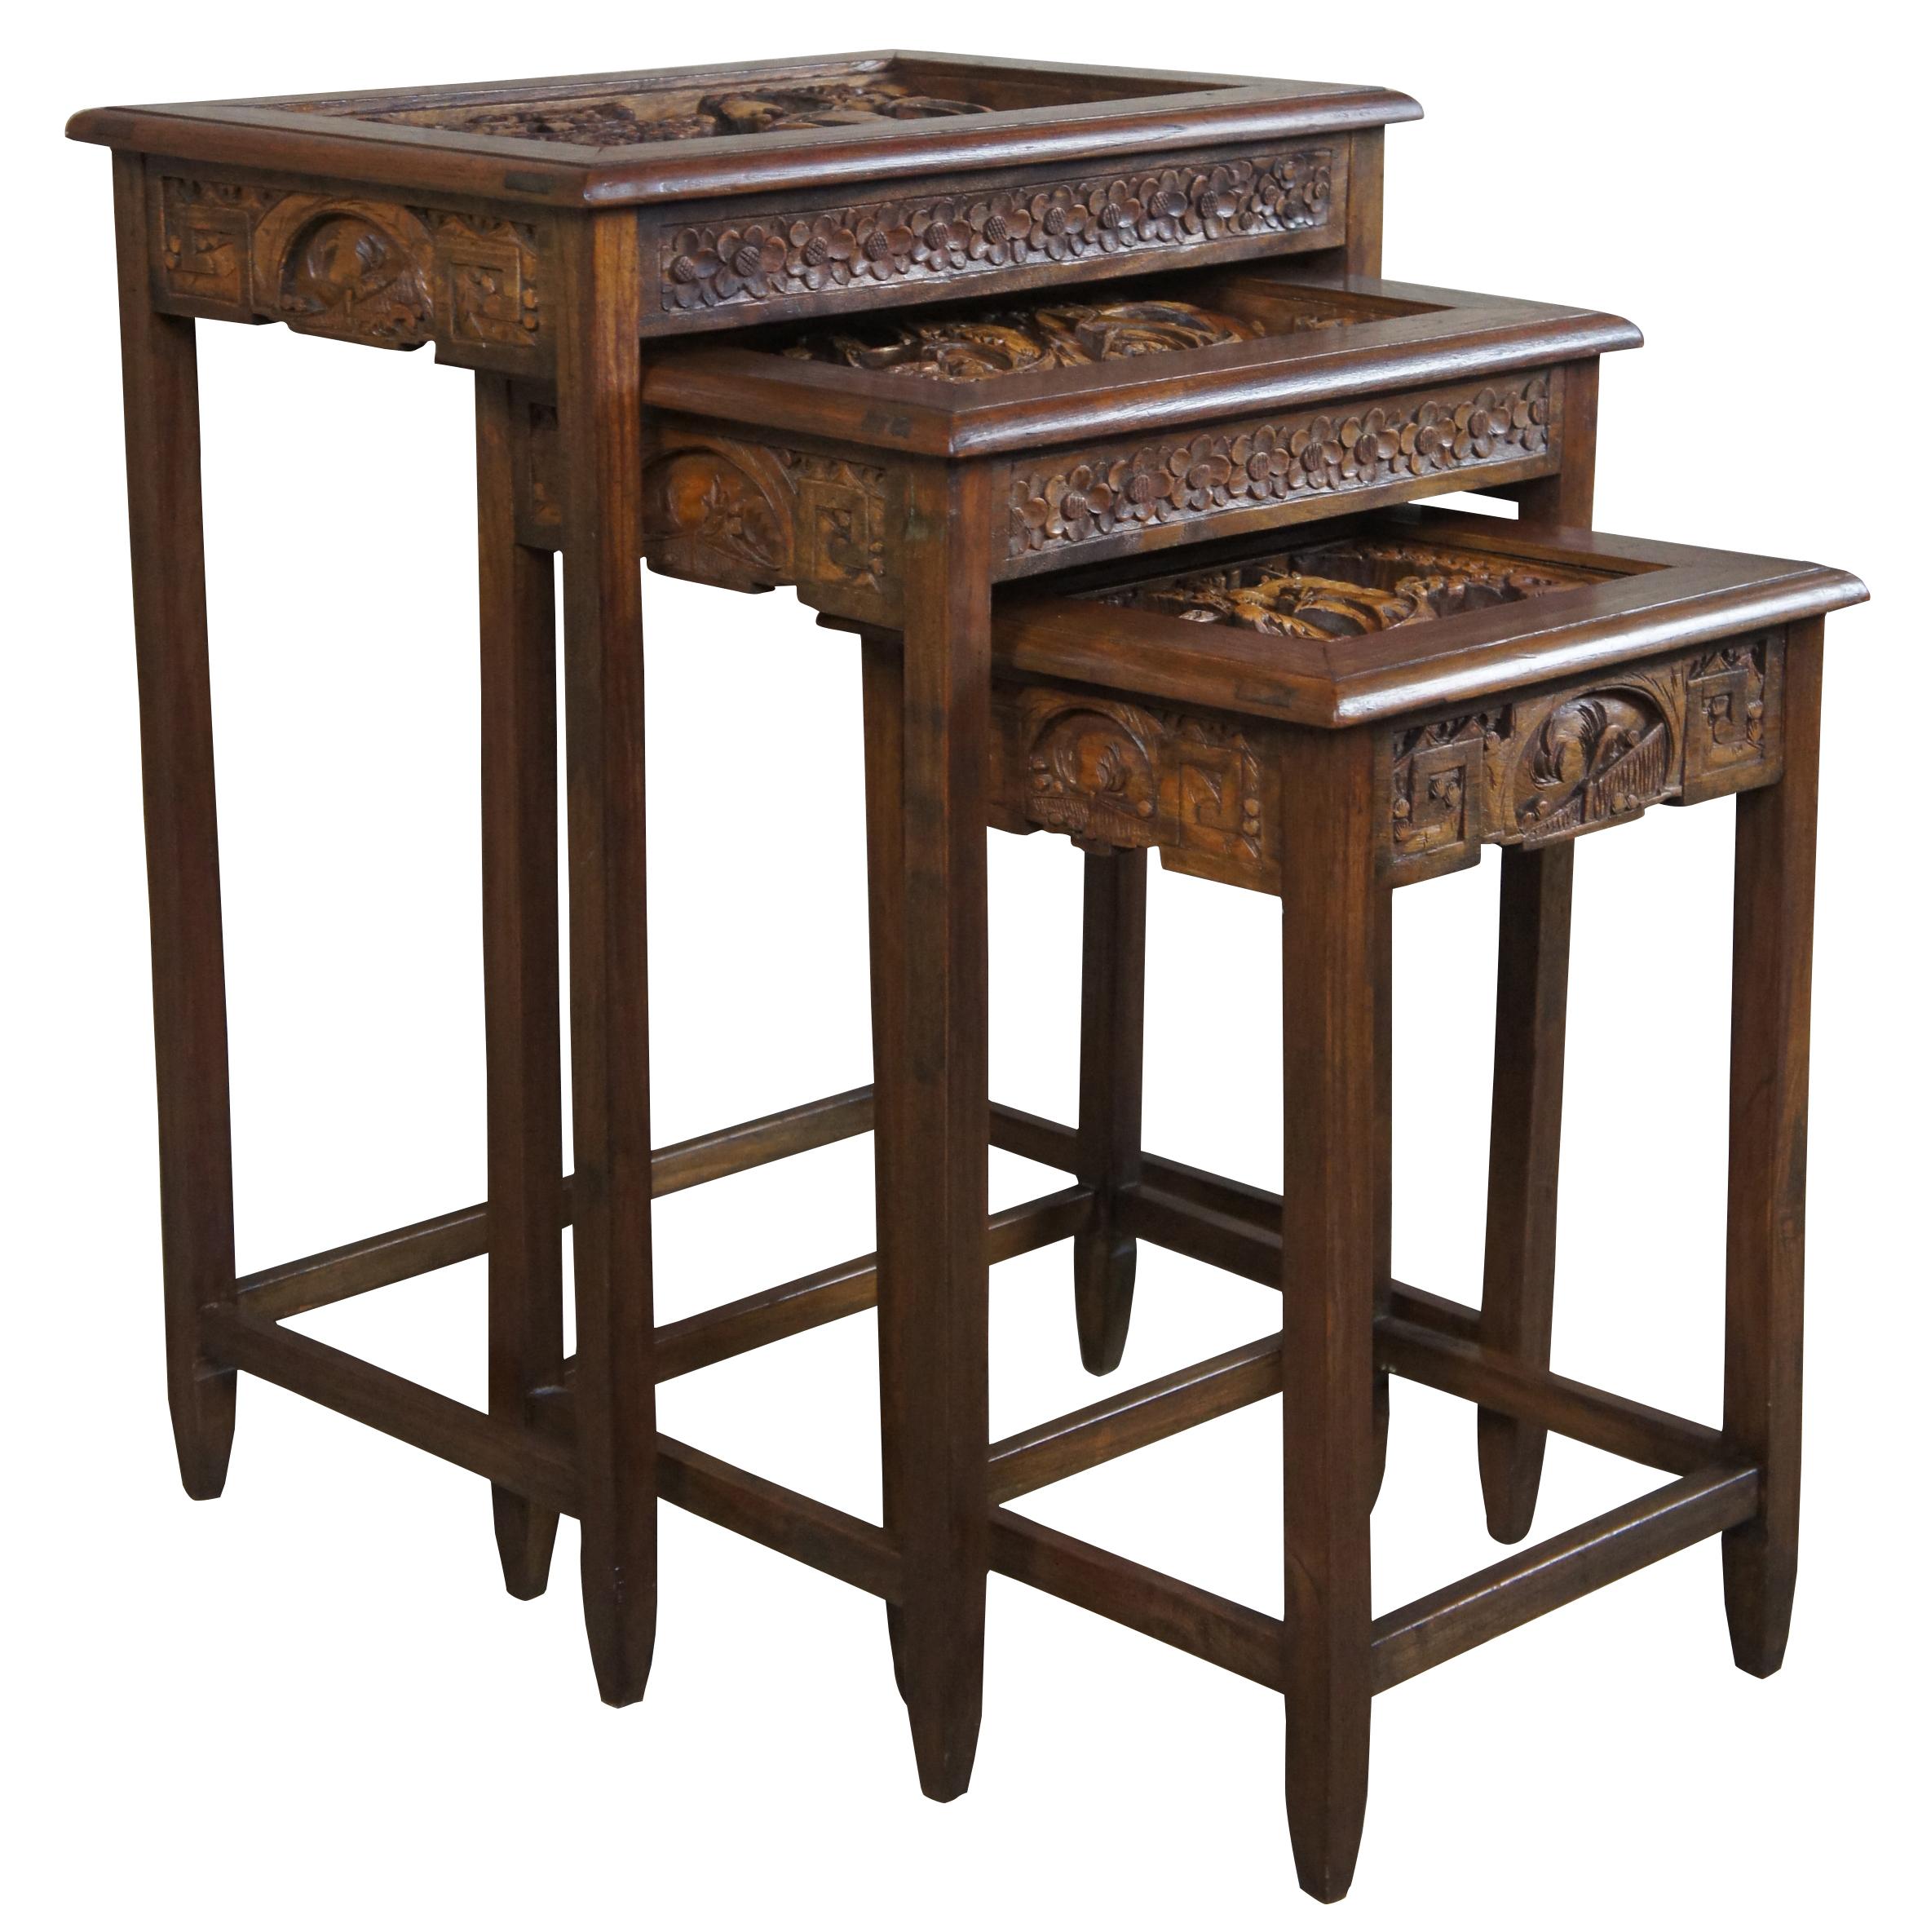 Set of three Chinese rosewood nesting tables. Each features an inset top with high relief boat and ocean scene. Additional features cherry blossom and chinoiserie carved apron. Each successive table has one more ship carved, so the smallest has one